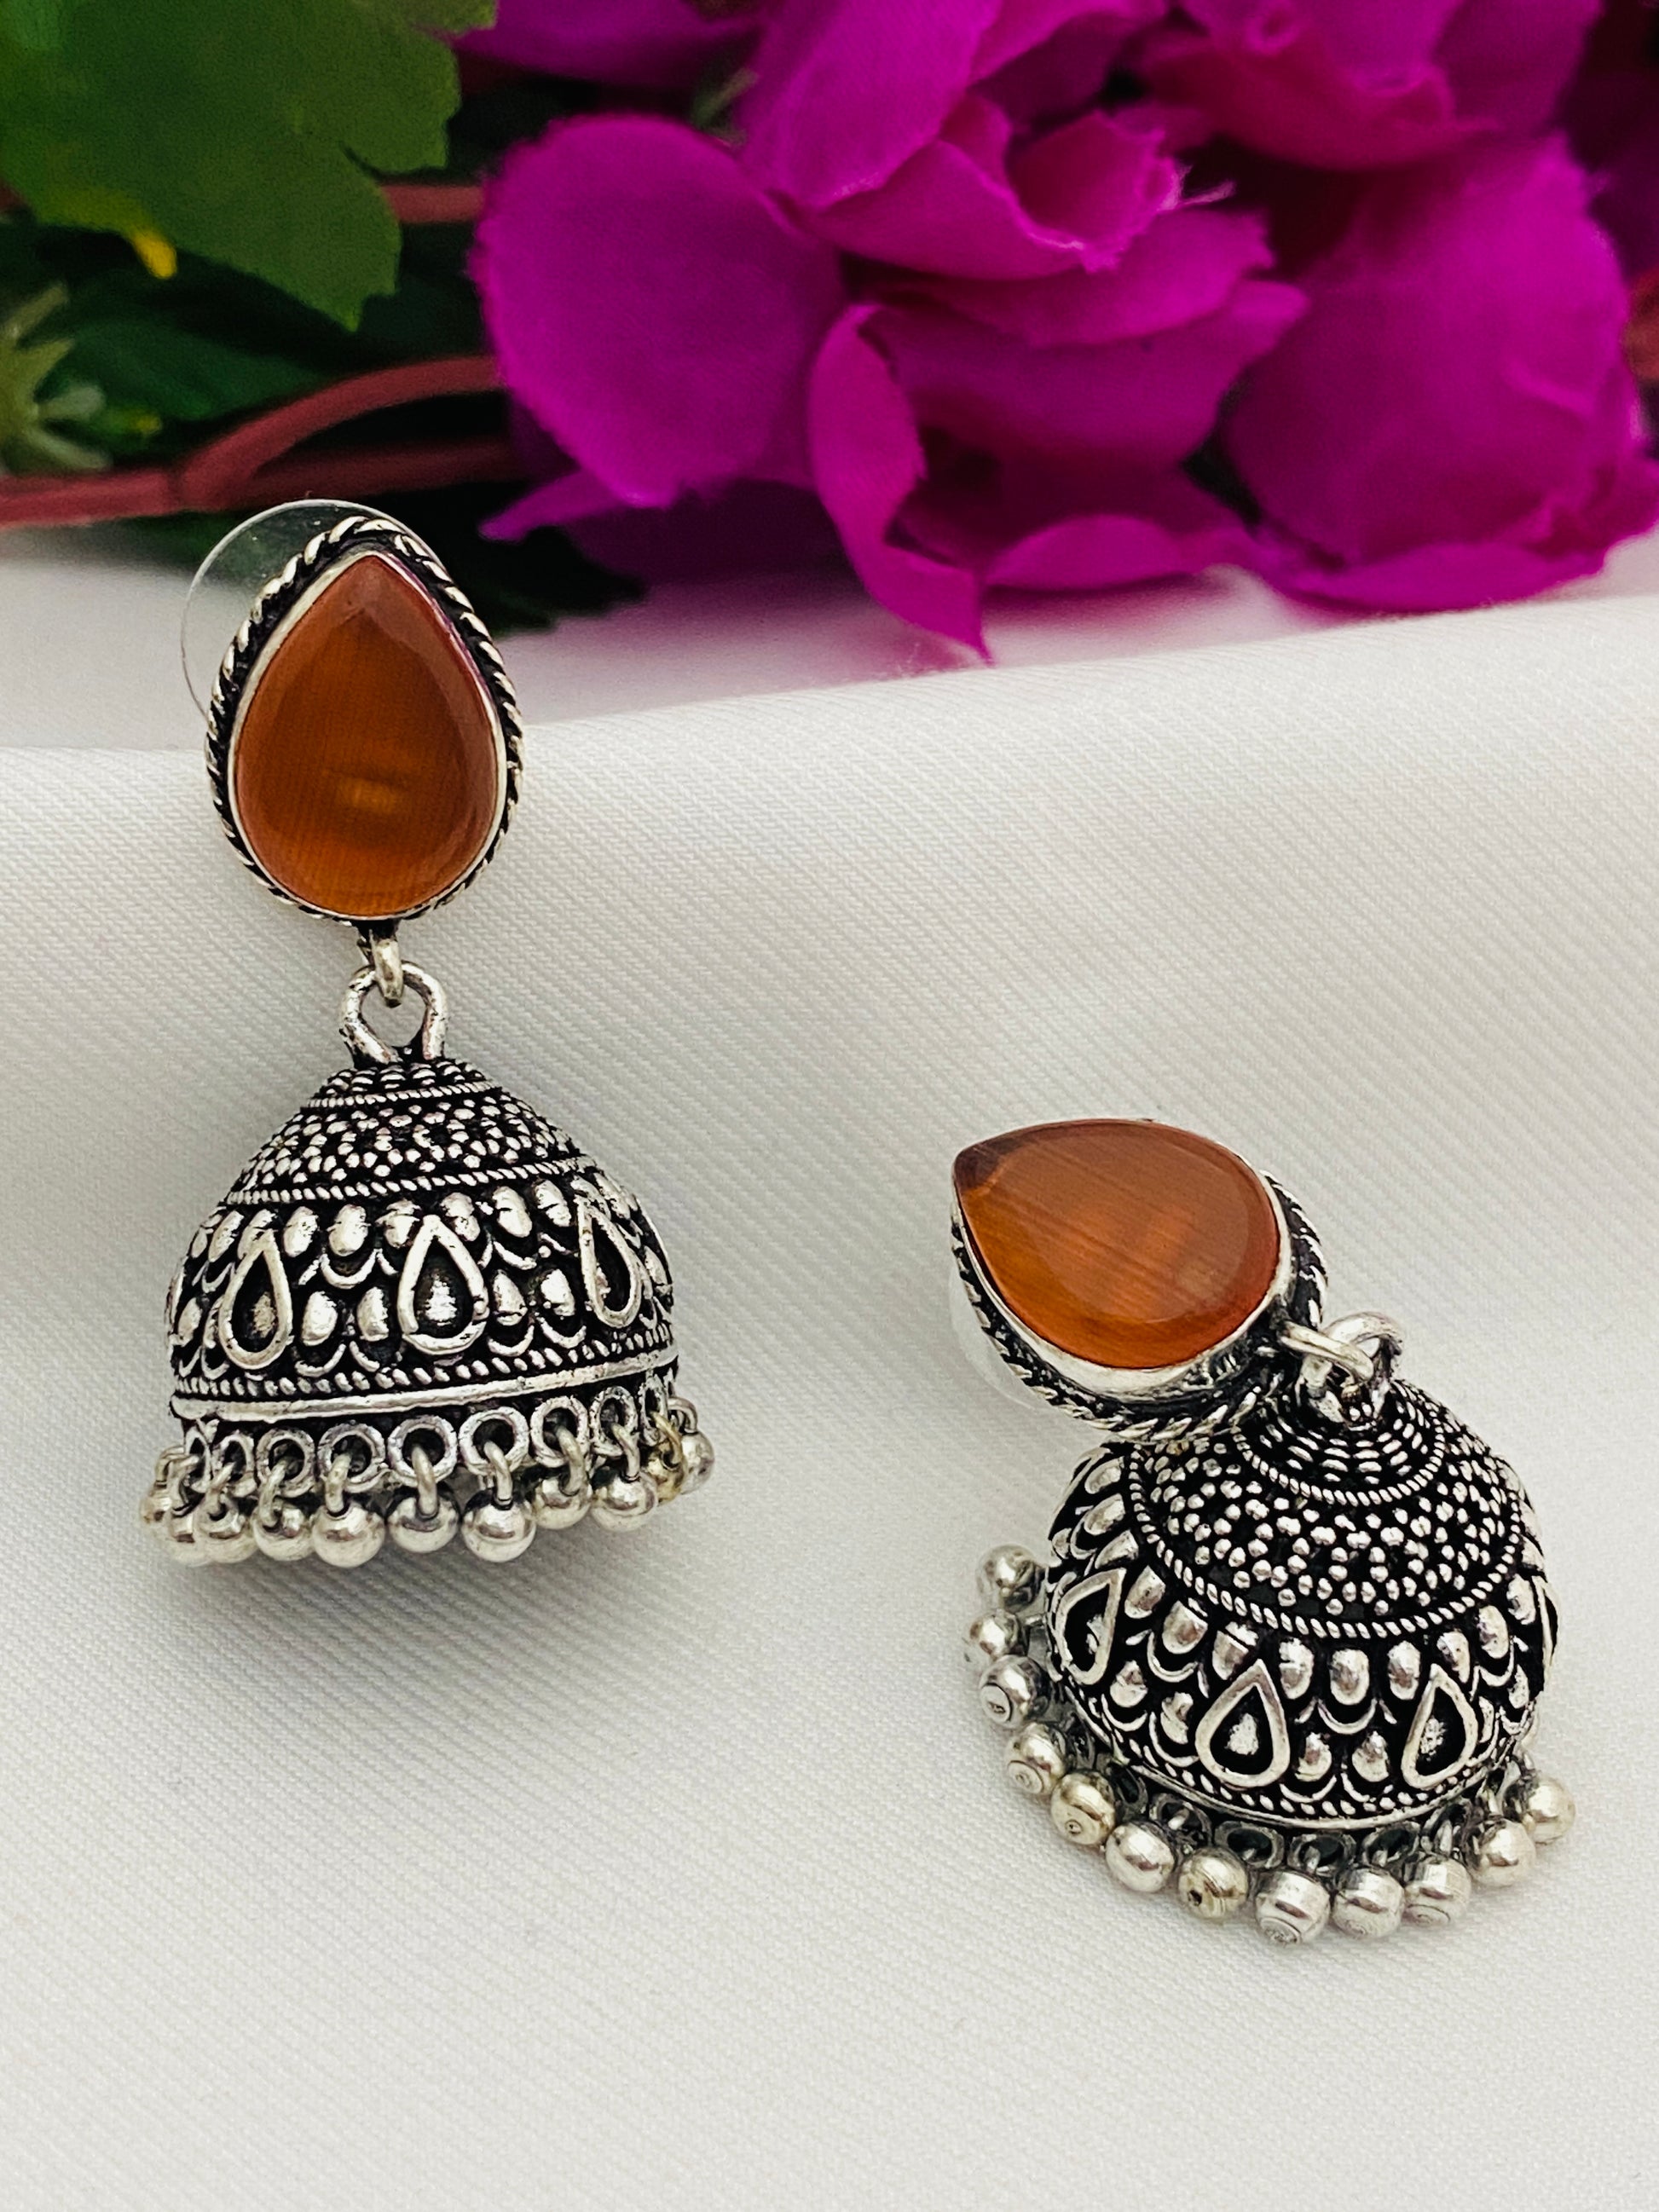 Silver Toned Designer Oxidized Jhumka Earrings With Black Pearl Beads in Chandler